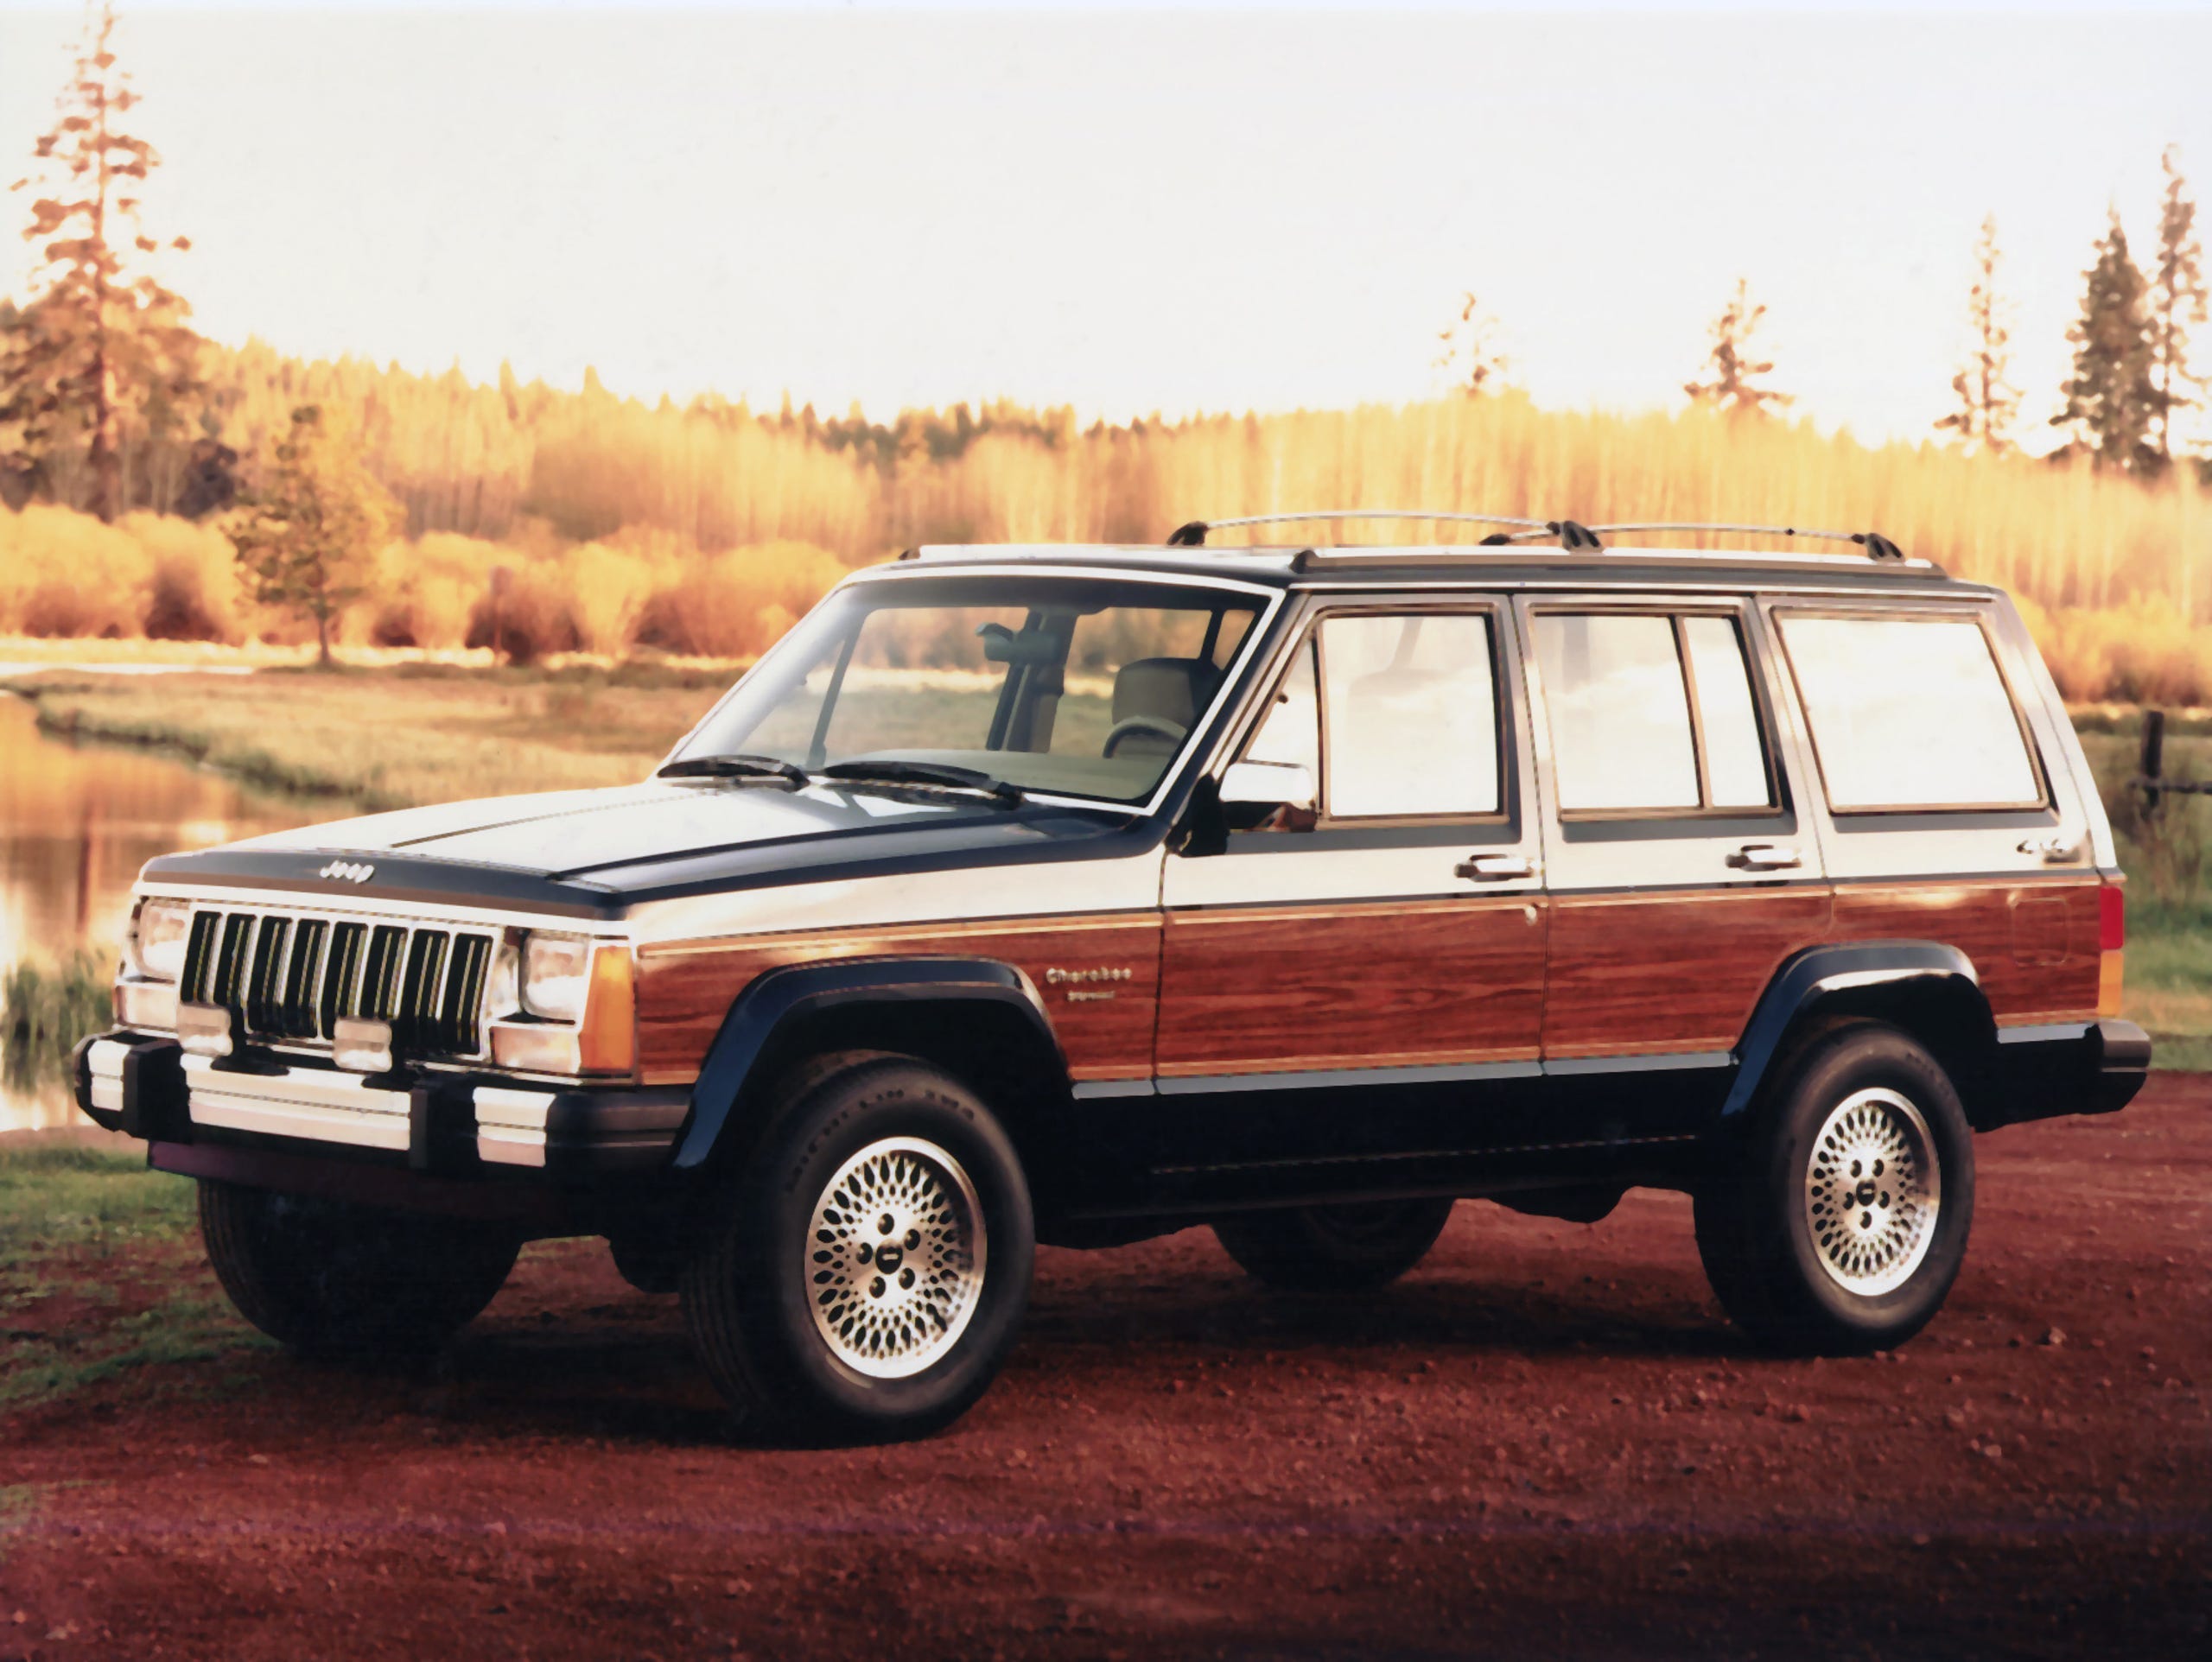 A 1991 Jeep Cherokee Briarwood is shown.